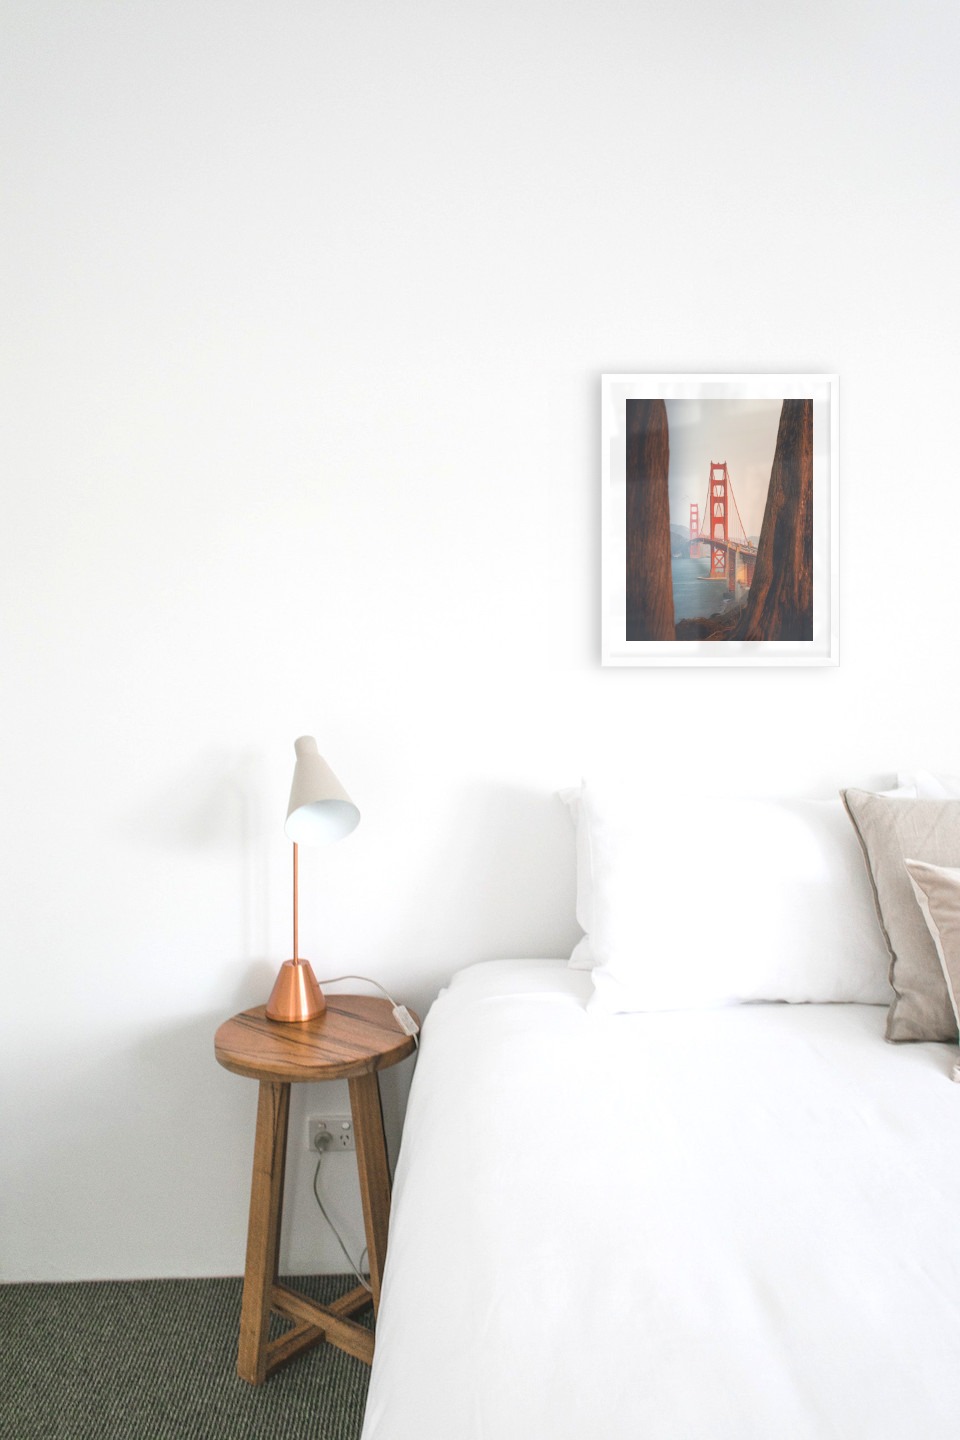 Gallery wall with picture frame in white in size 40x50 with print "Golden Gate Bridge"